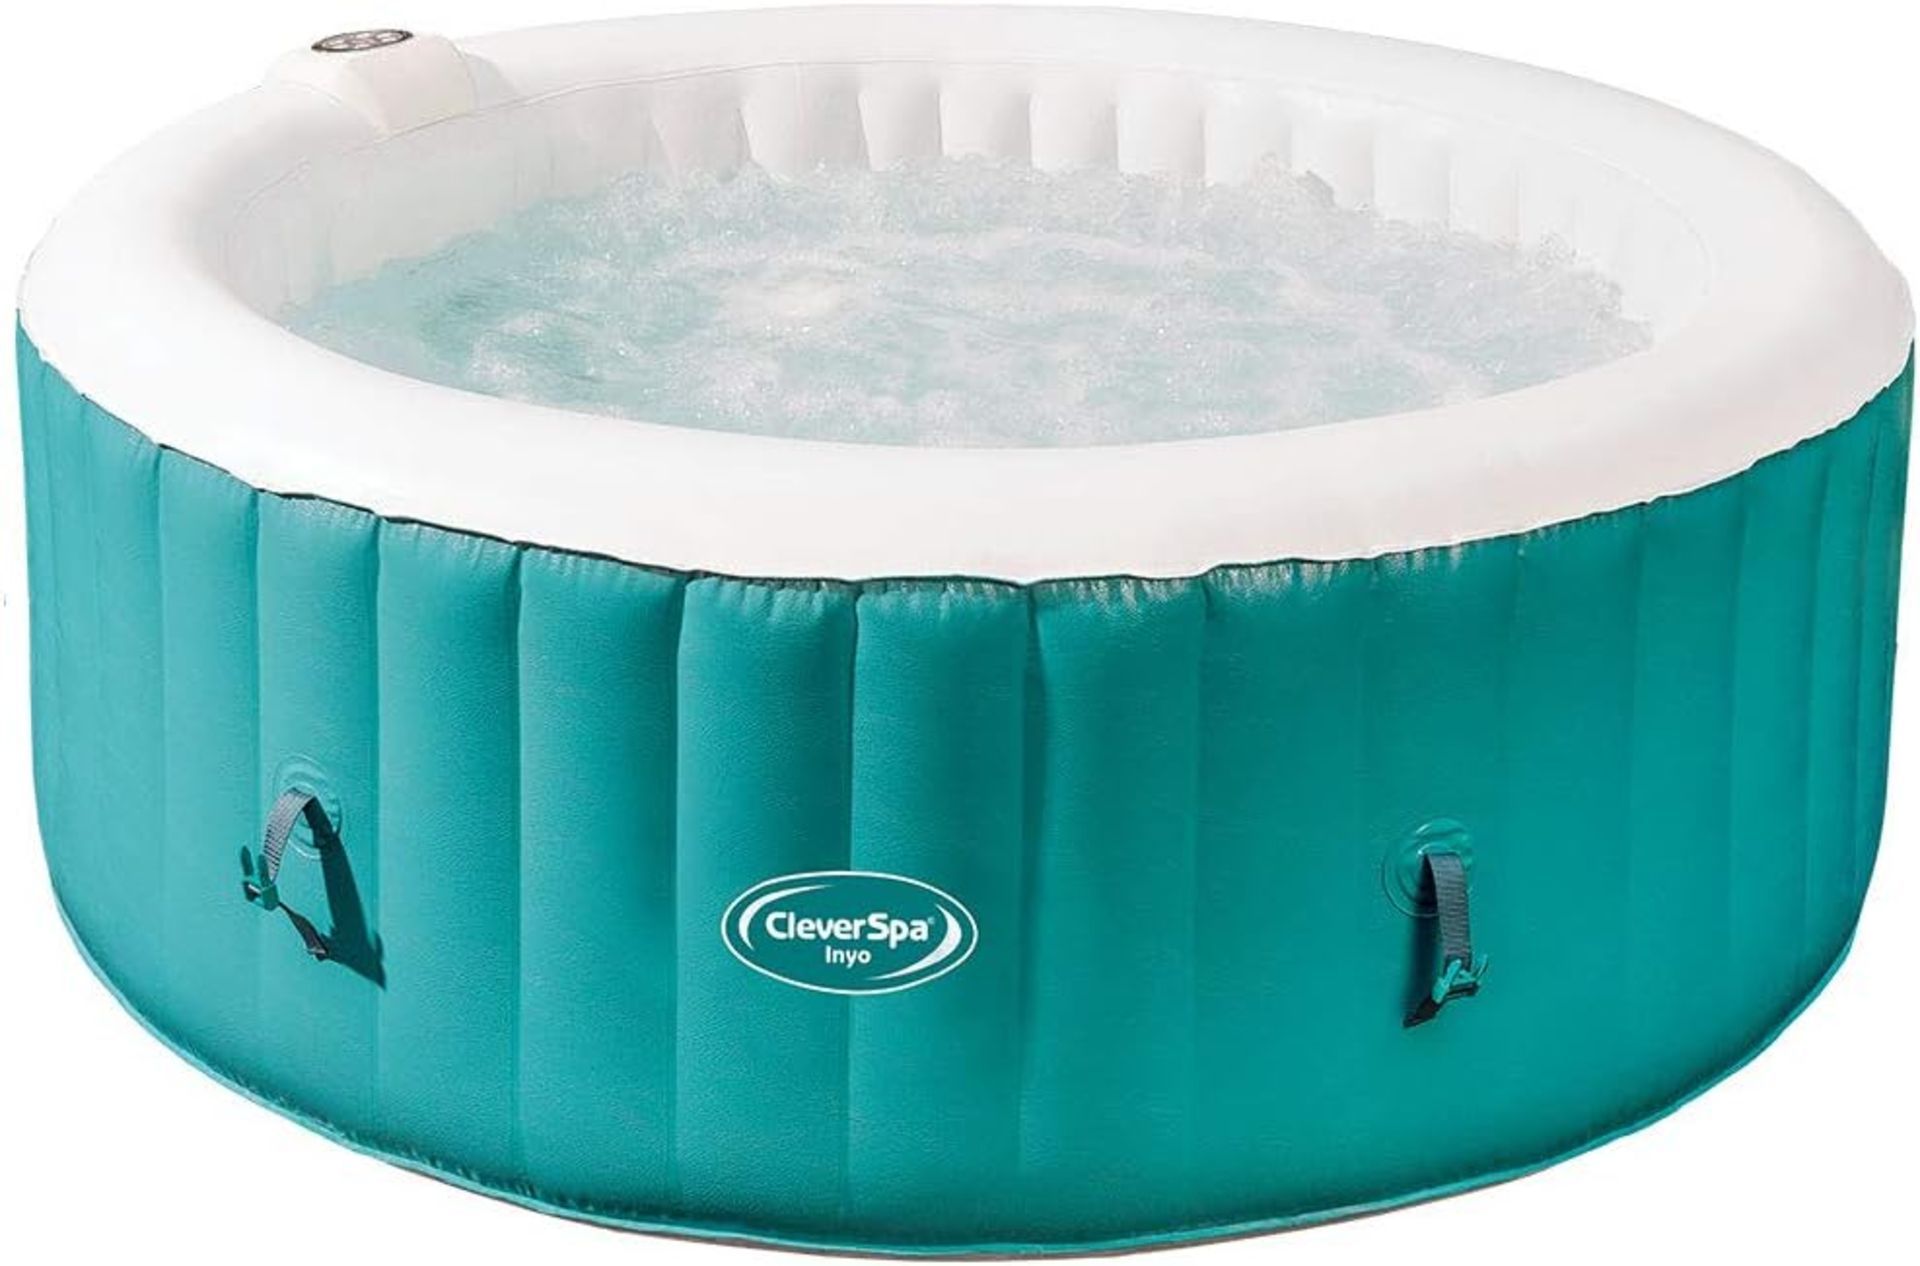 Pallet to Contain 8 x New & Boxed CleverSpa Inyo 4 Person Hot Tub. RRP £499.99 each. There is no - Image 4 of 5